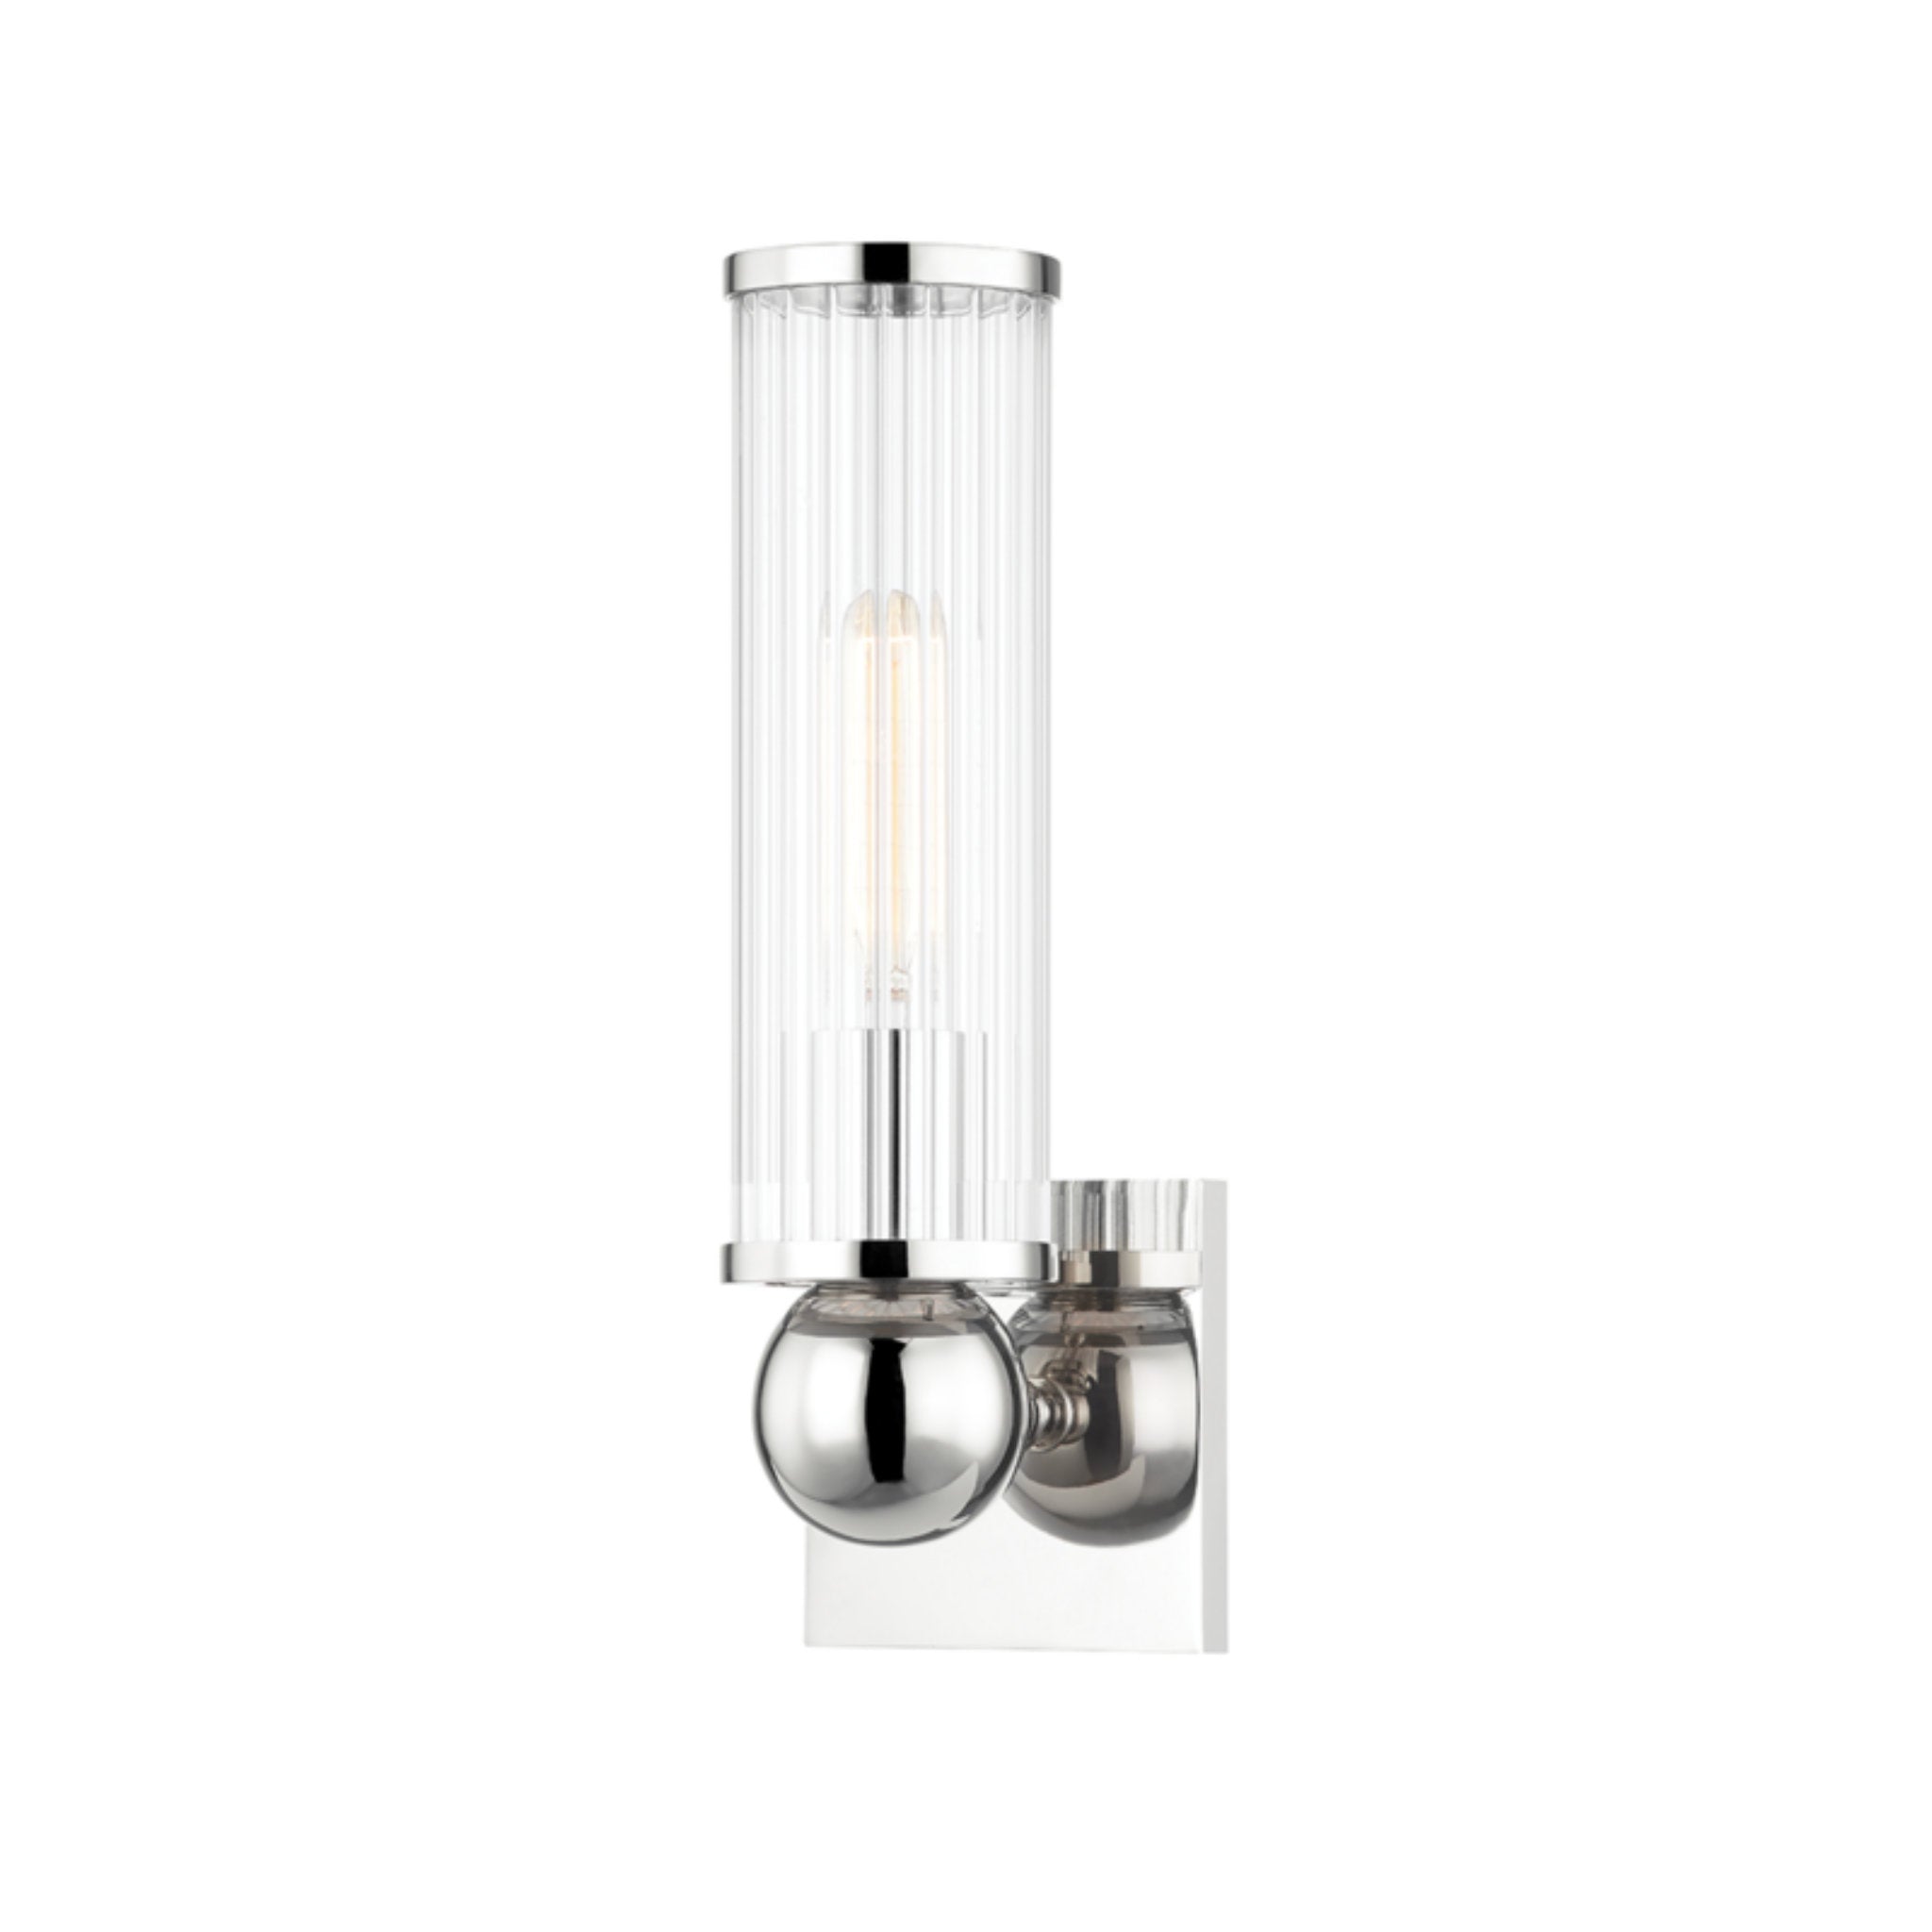 Malone 1 Light Wall Sconce in Polished Nickel